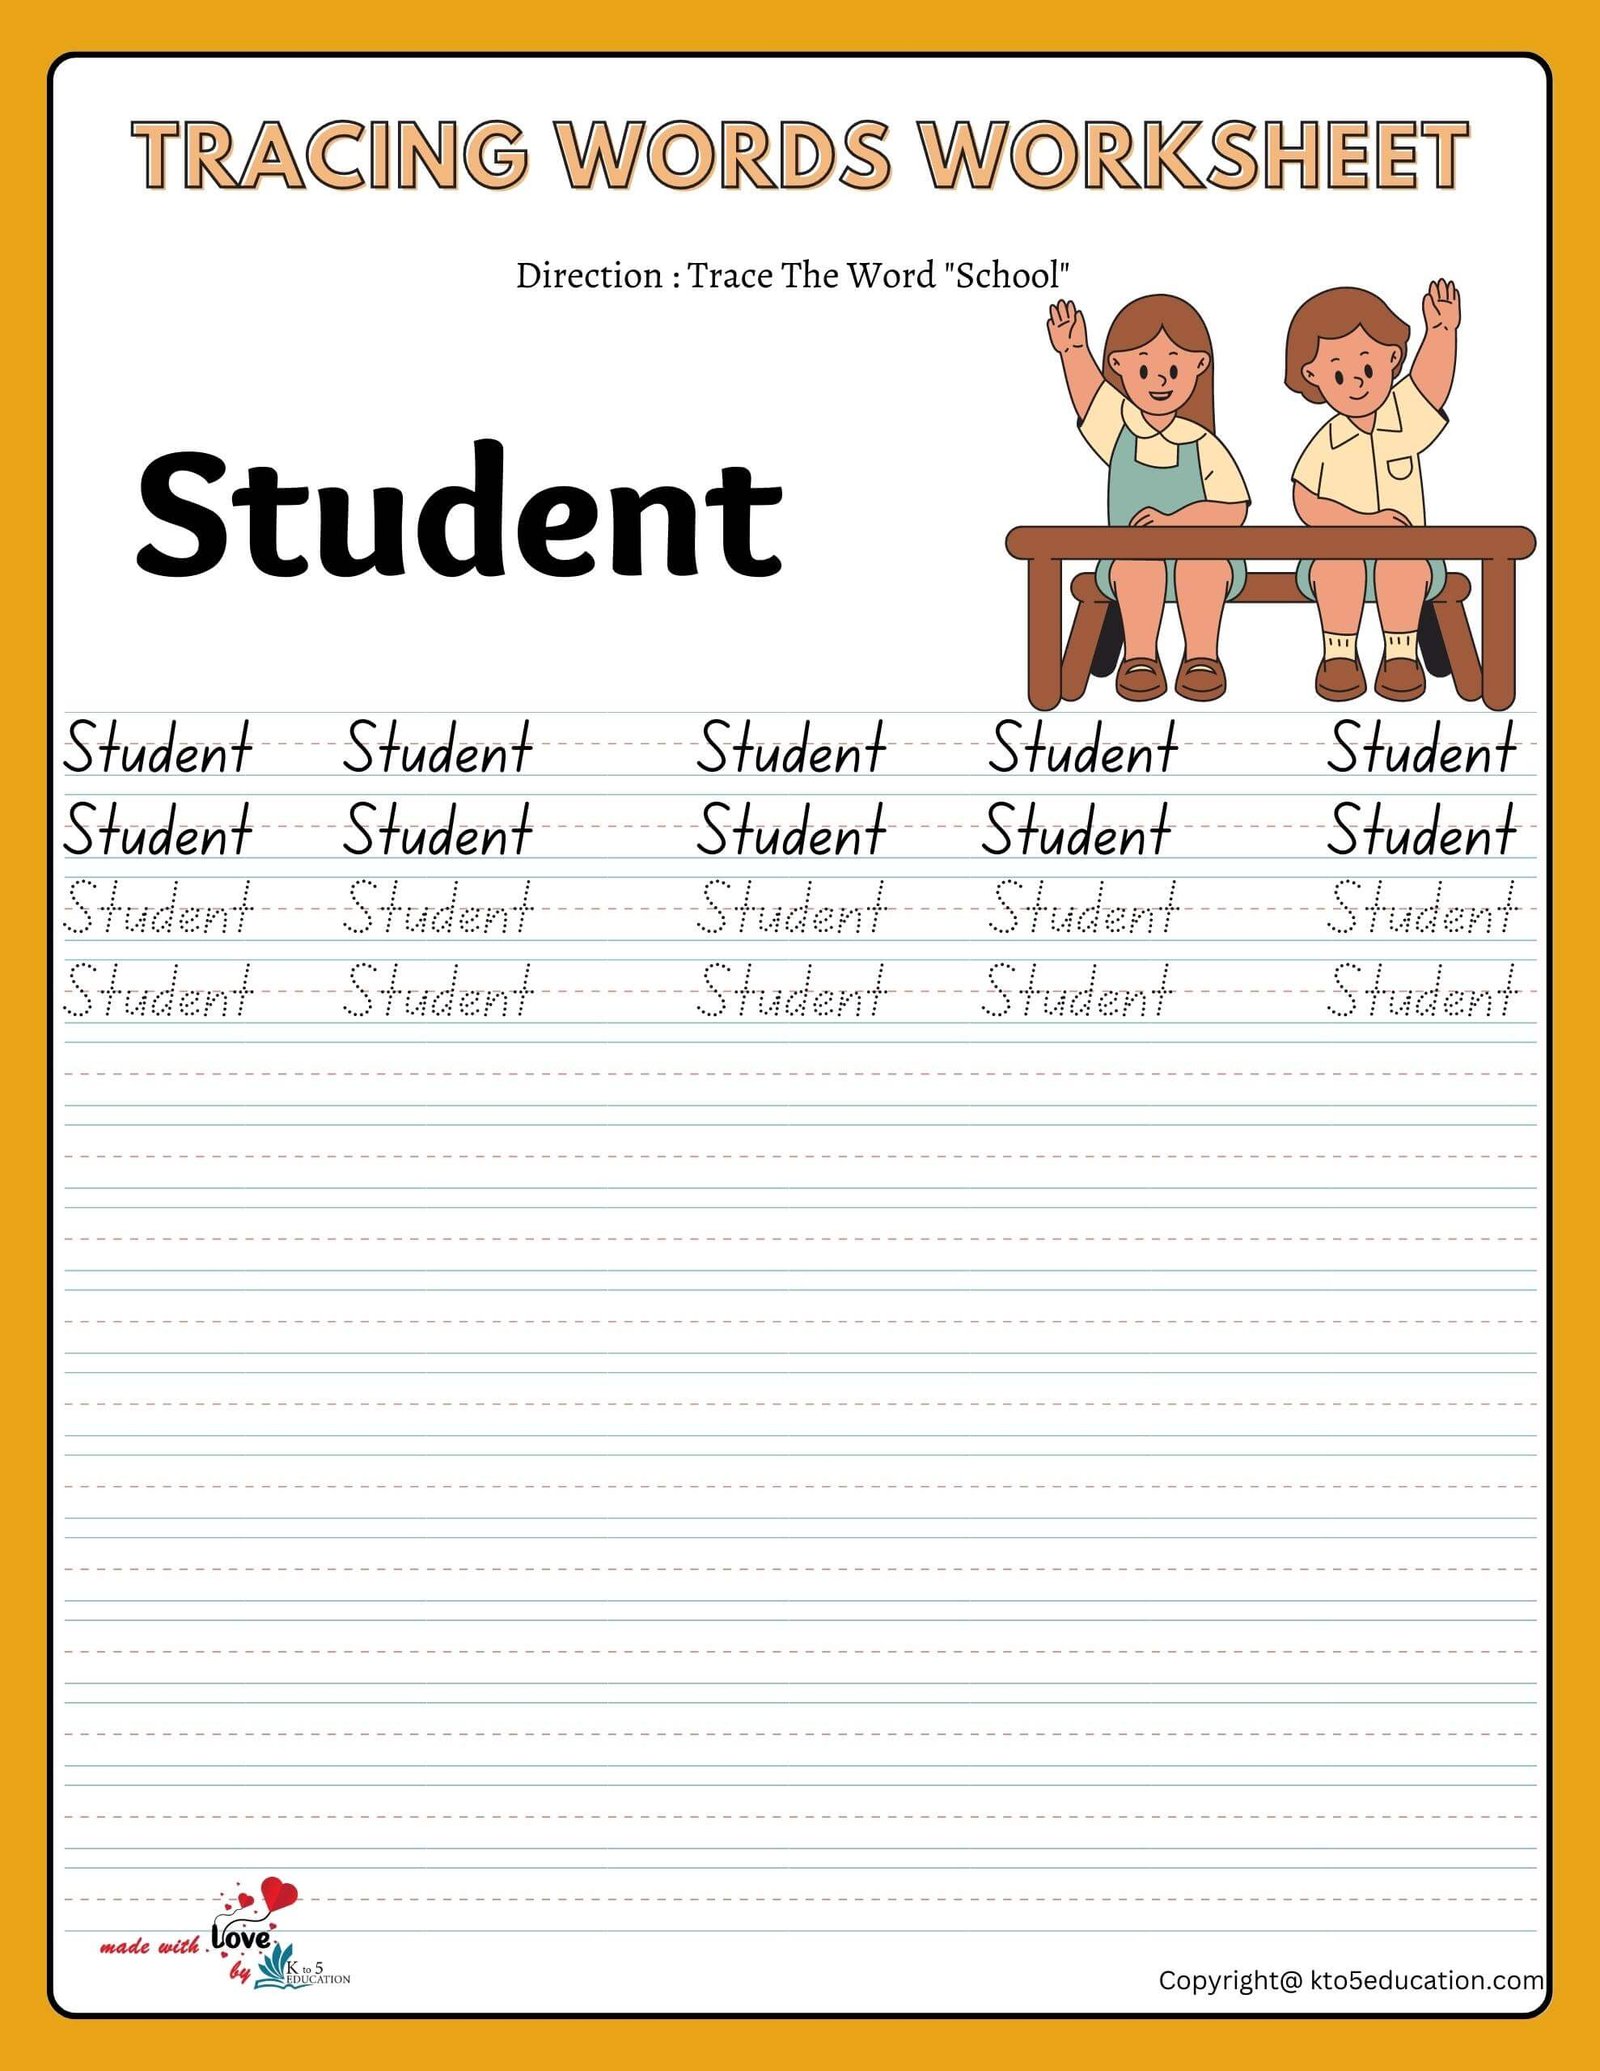 Trace The Word Student Worksheet